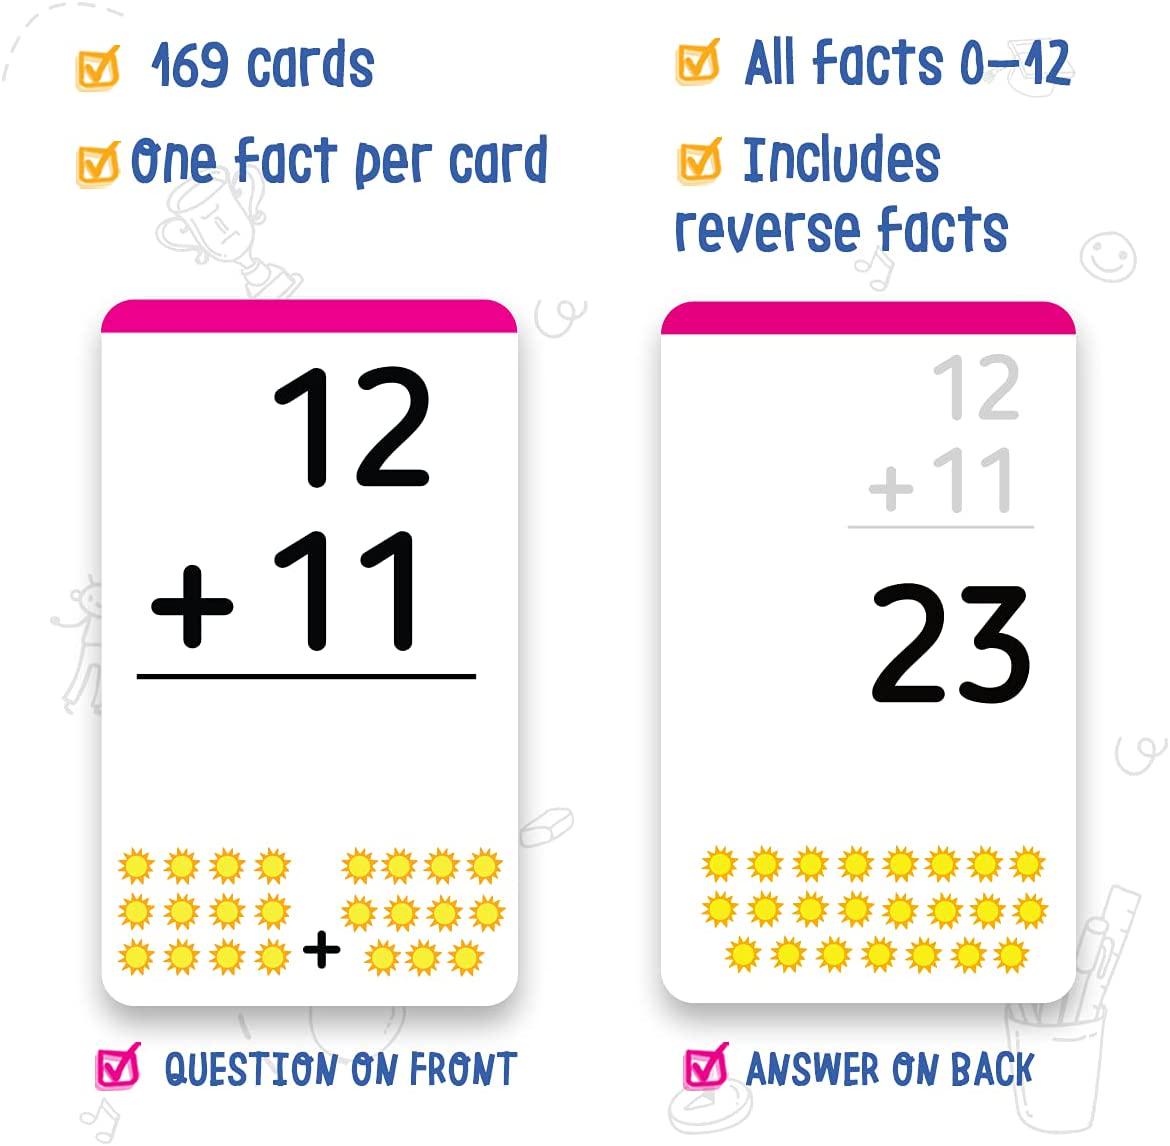 merka, merka Educational Flashcards: Addition Facts (Numbers 0 - 12) Learning Toy/Card Game for Kids Ages 4 to 8 Homeschool/Classroom Resource for Preschool, Kindergarten and Beyond Set of 169 Cards